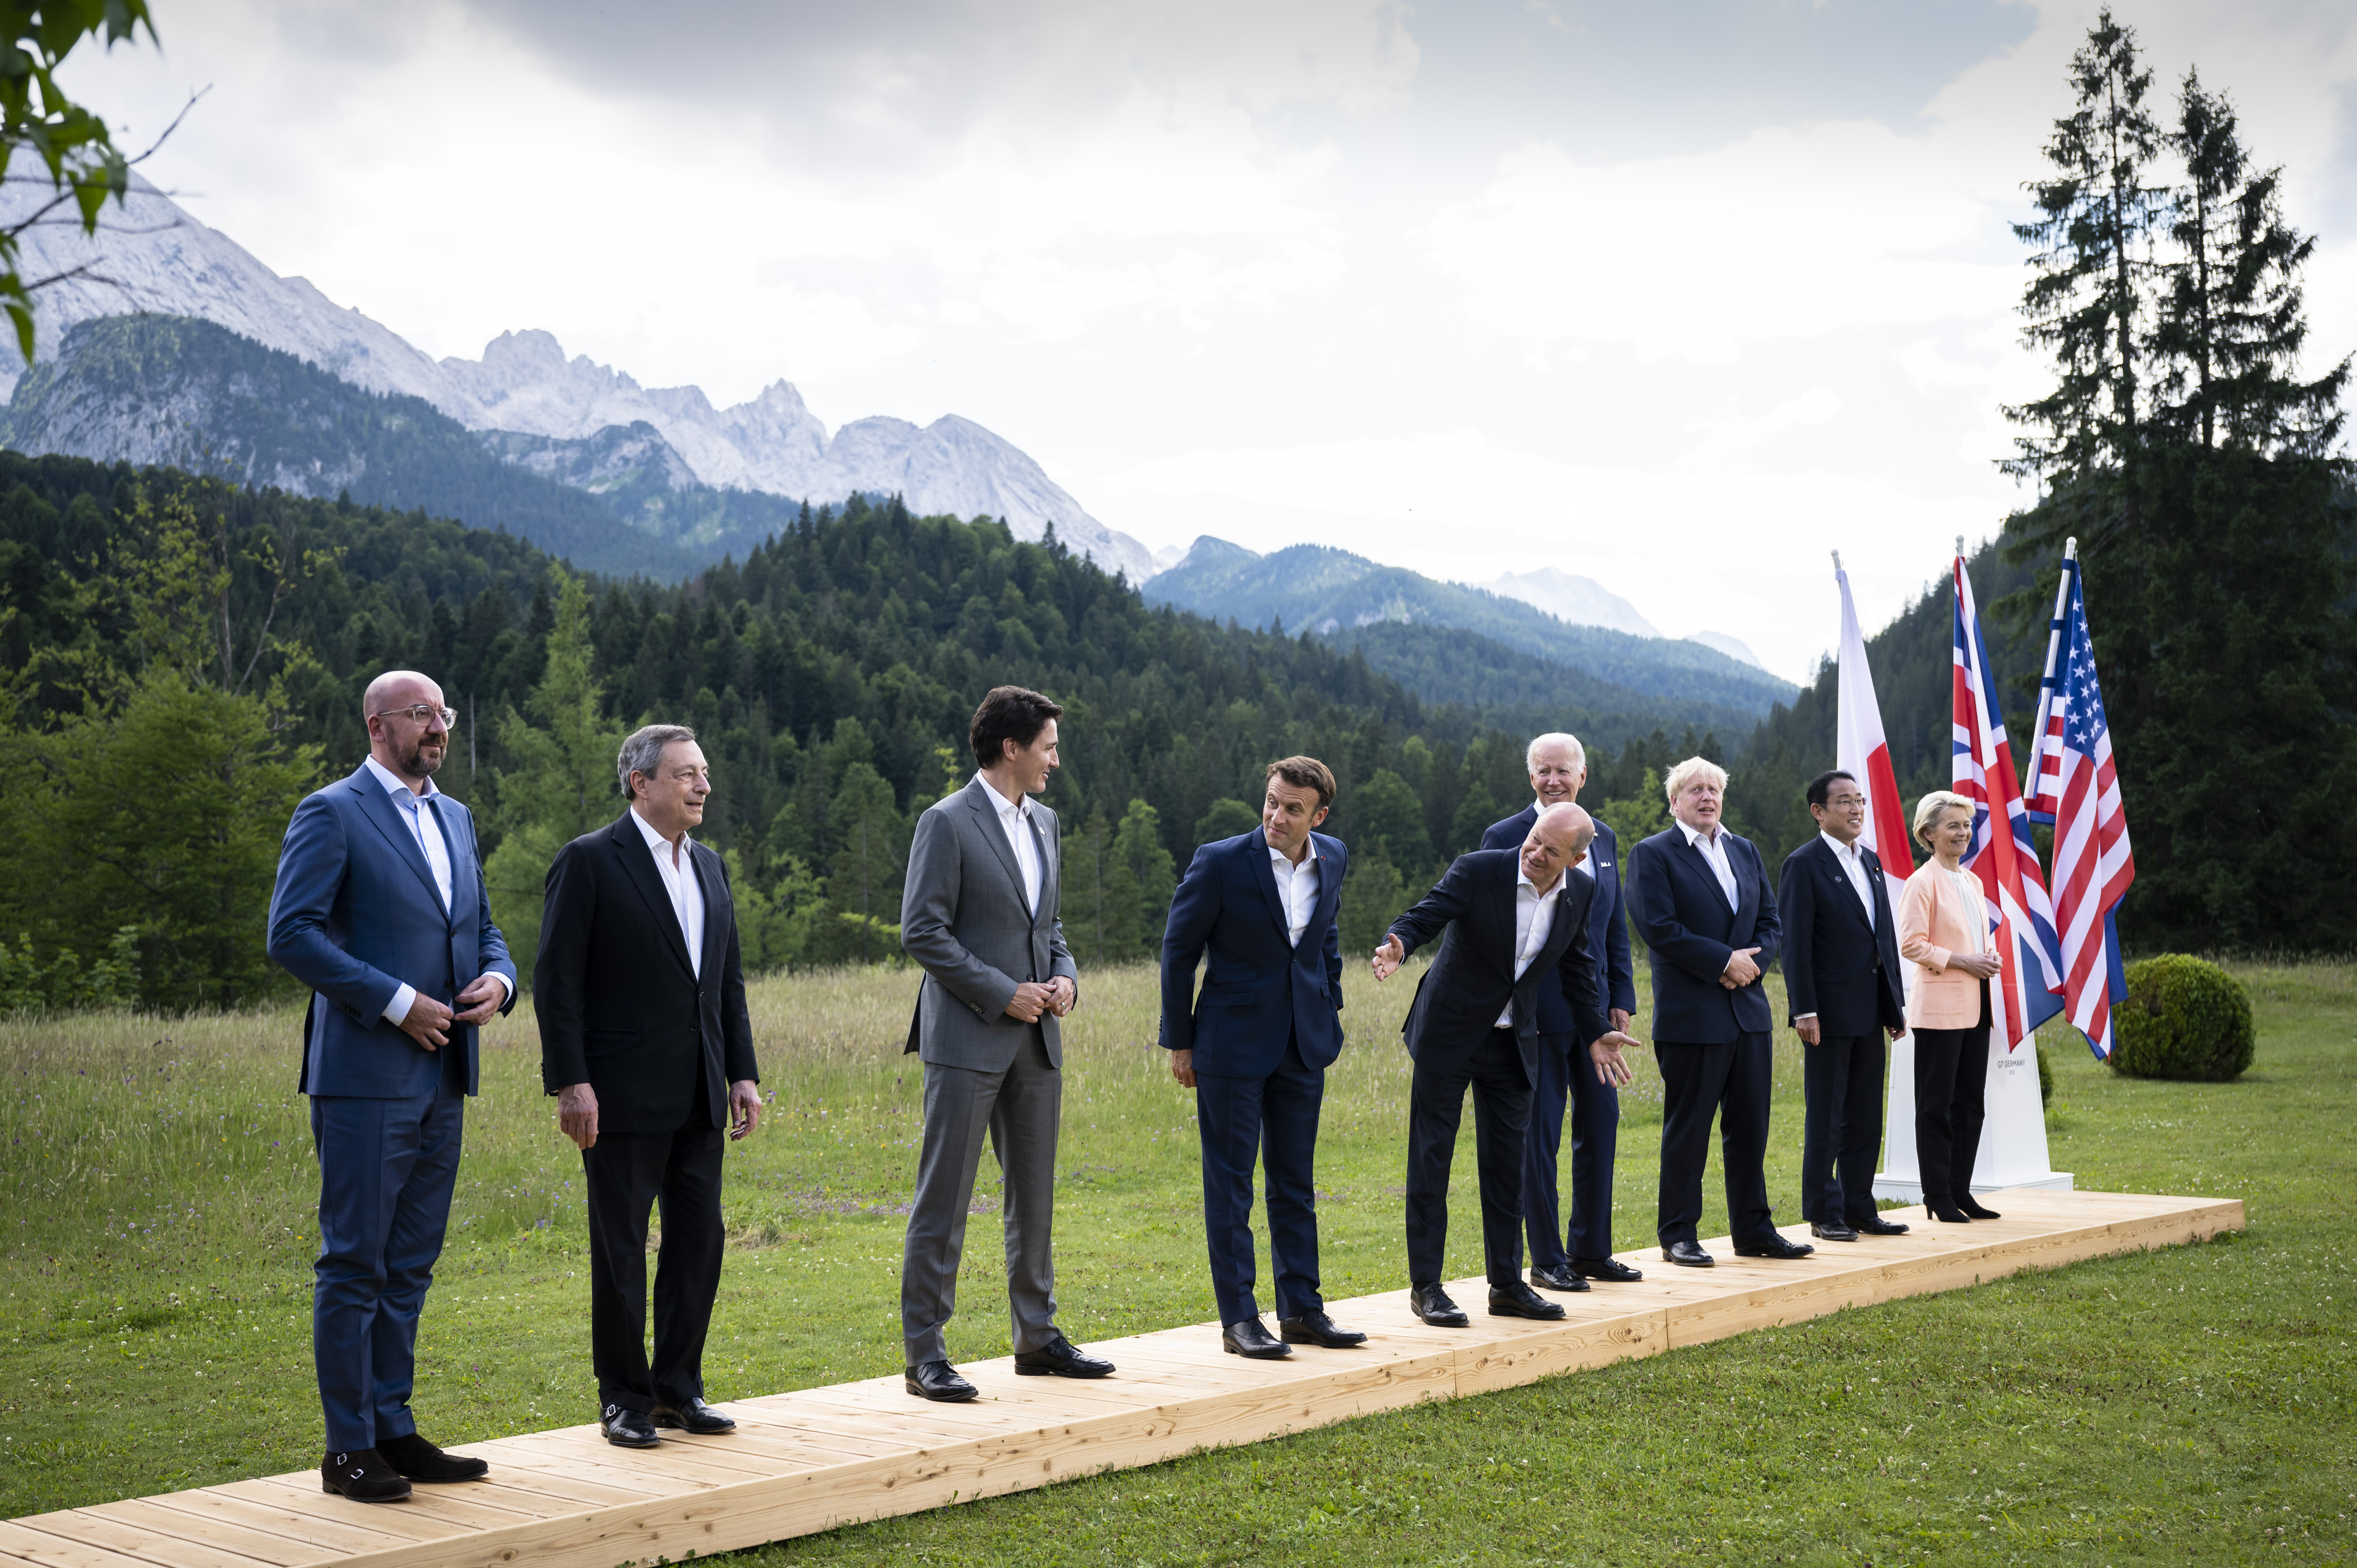 Family photo of the G7 participants